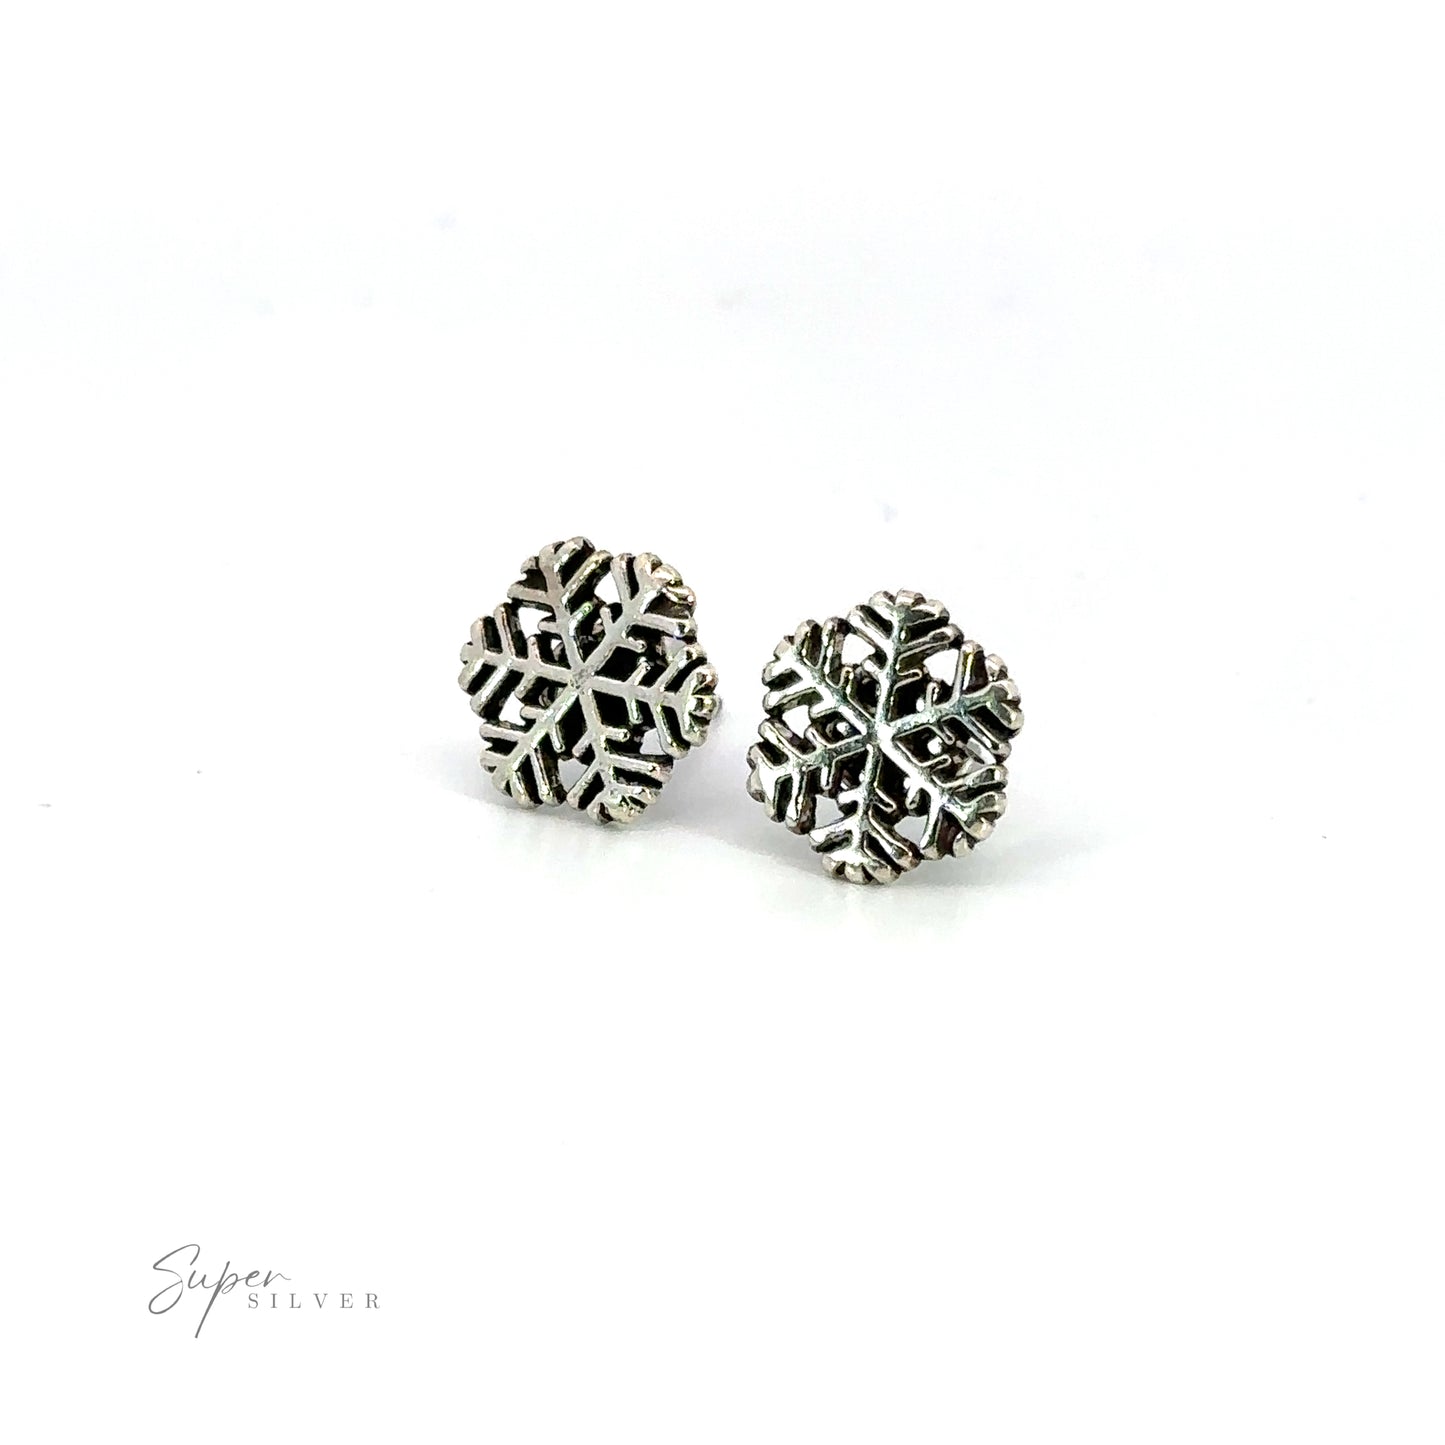 Embrace the winter wonder with these stunning Delicate Snowflake Studs. Shimmering in silver, they exude seasonal cheer.